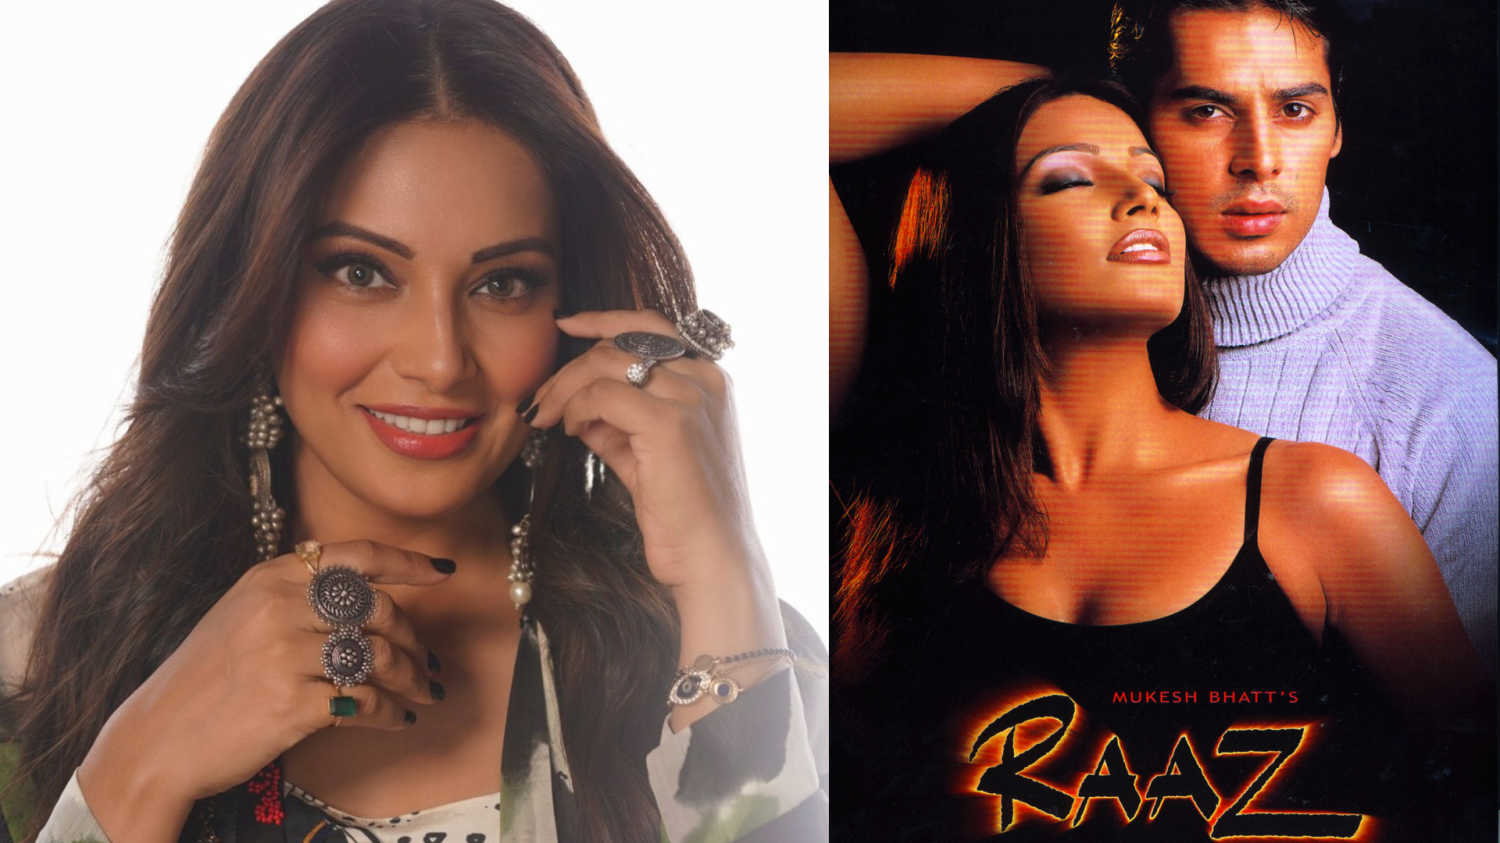 The makers of the movie Raaz first chose this actress, not Bipasha Basu